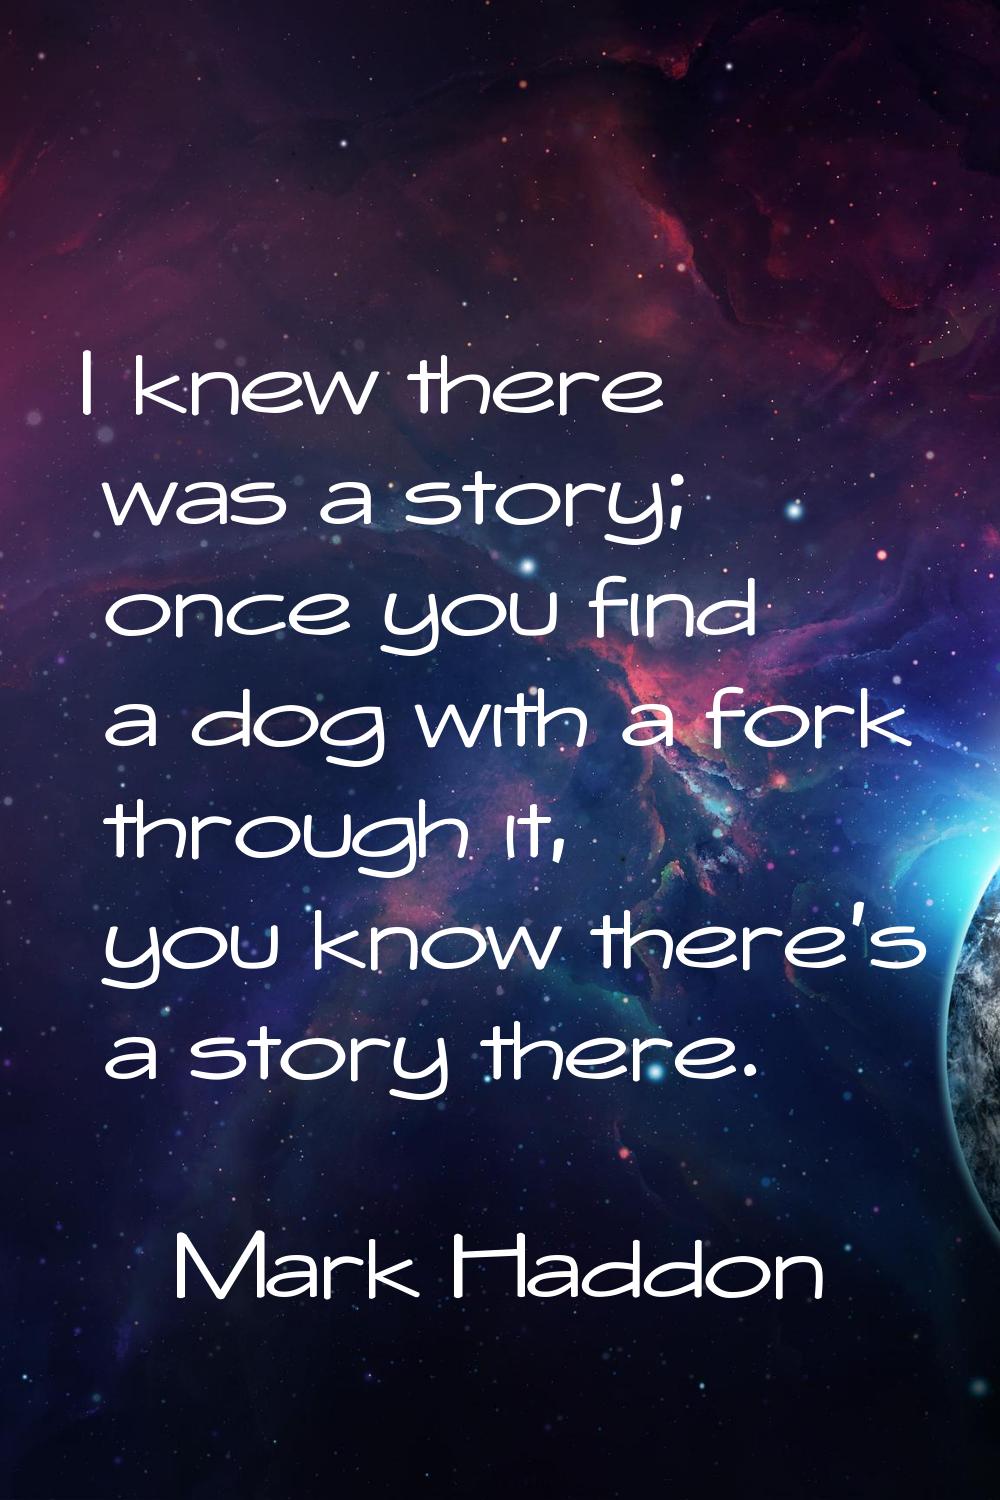 I knew there was a story; once you find a dog with a fork through it, you know there's a story ther